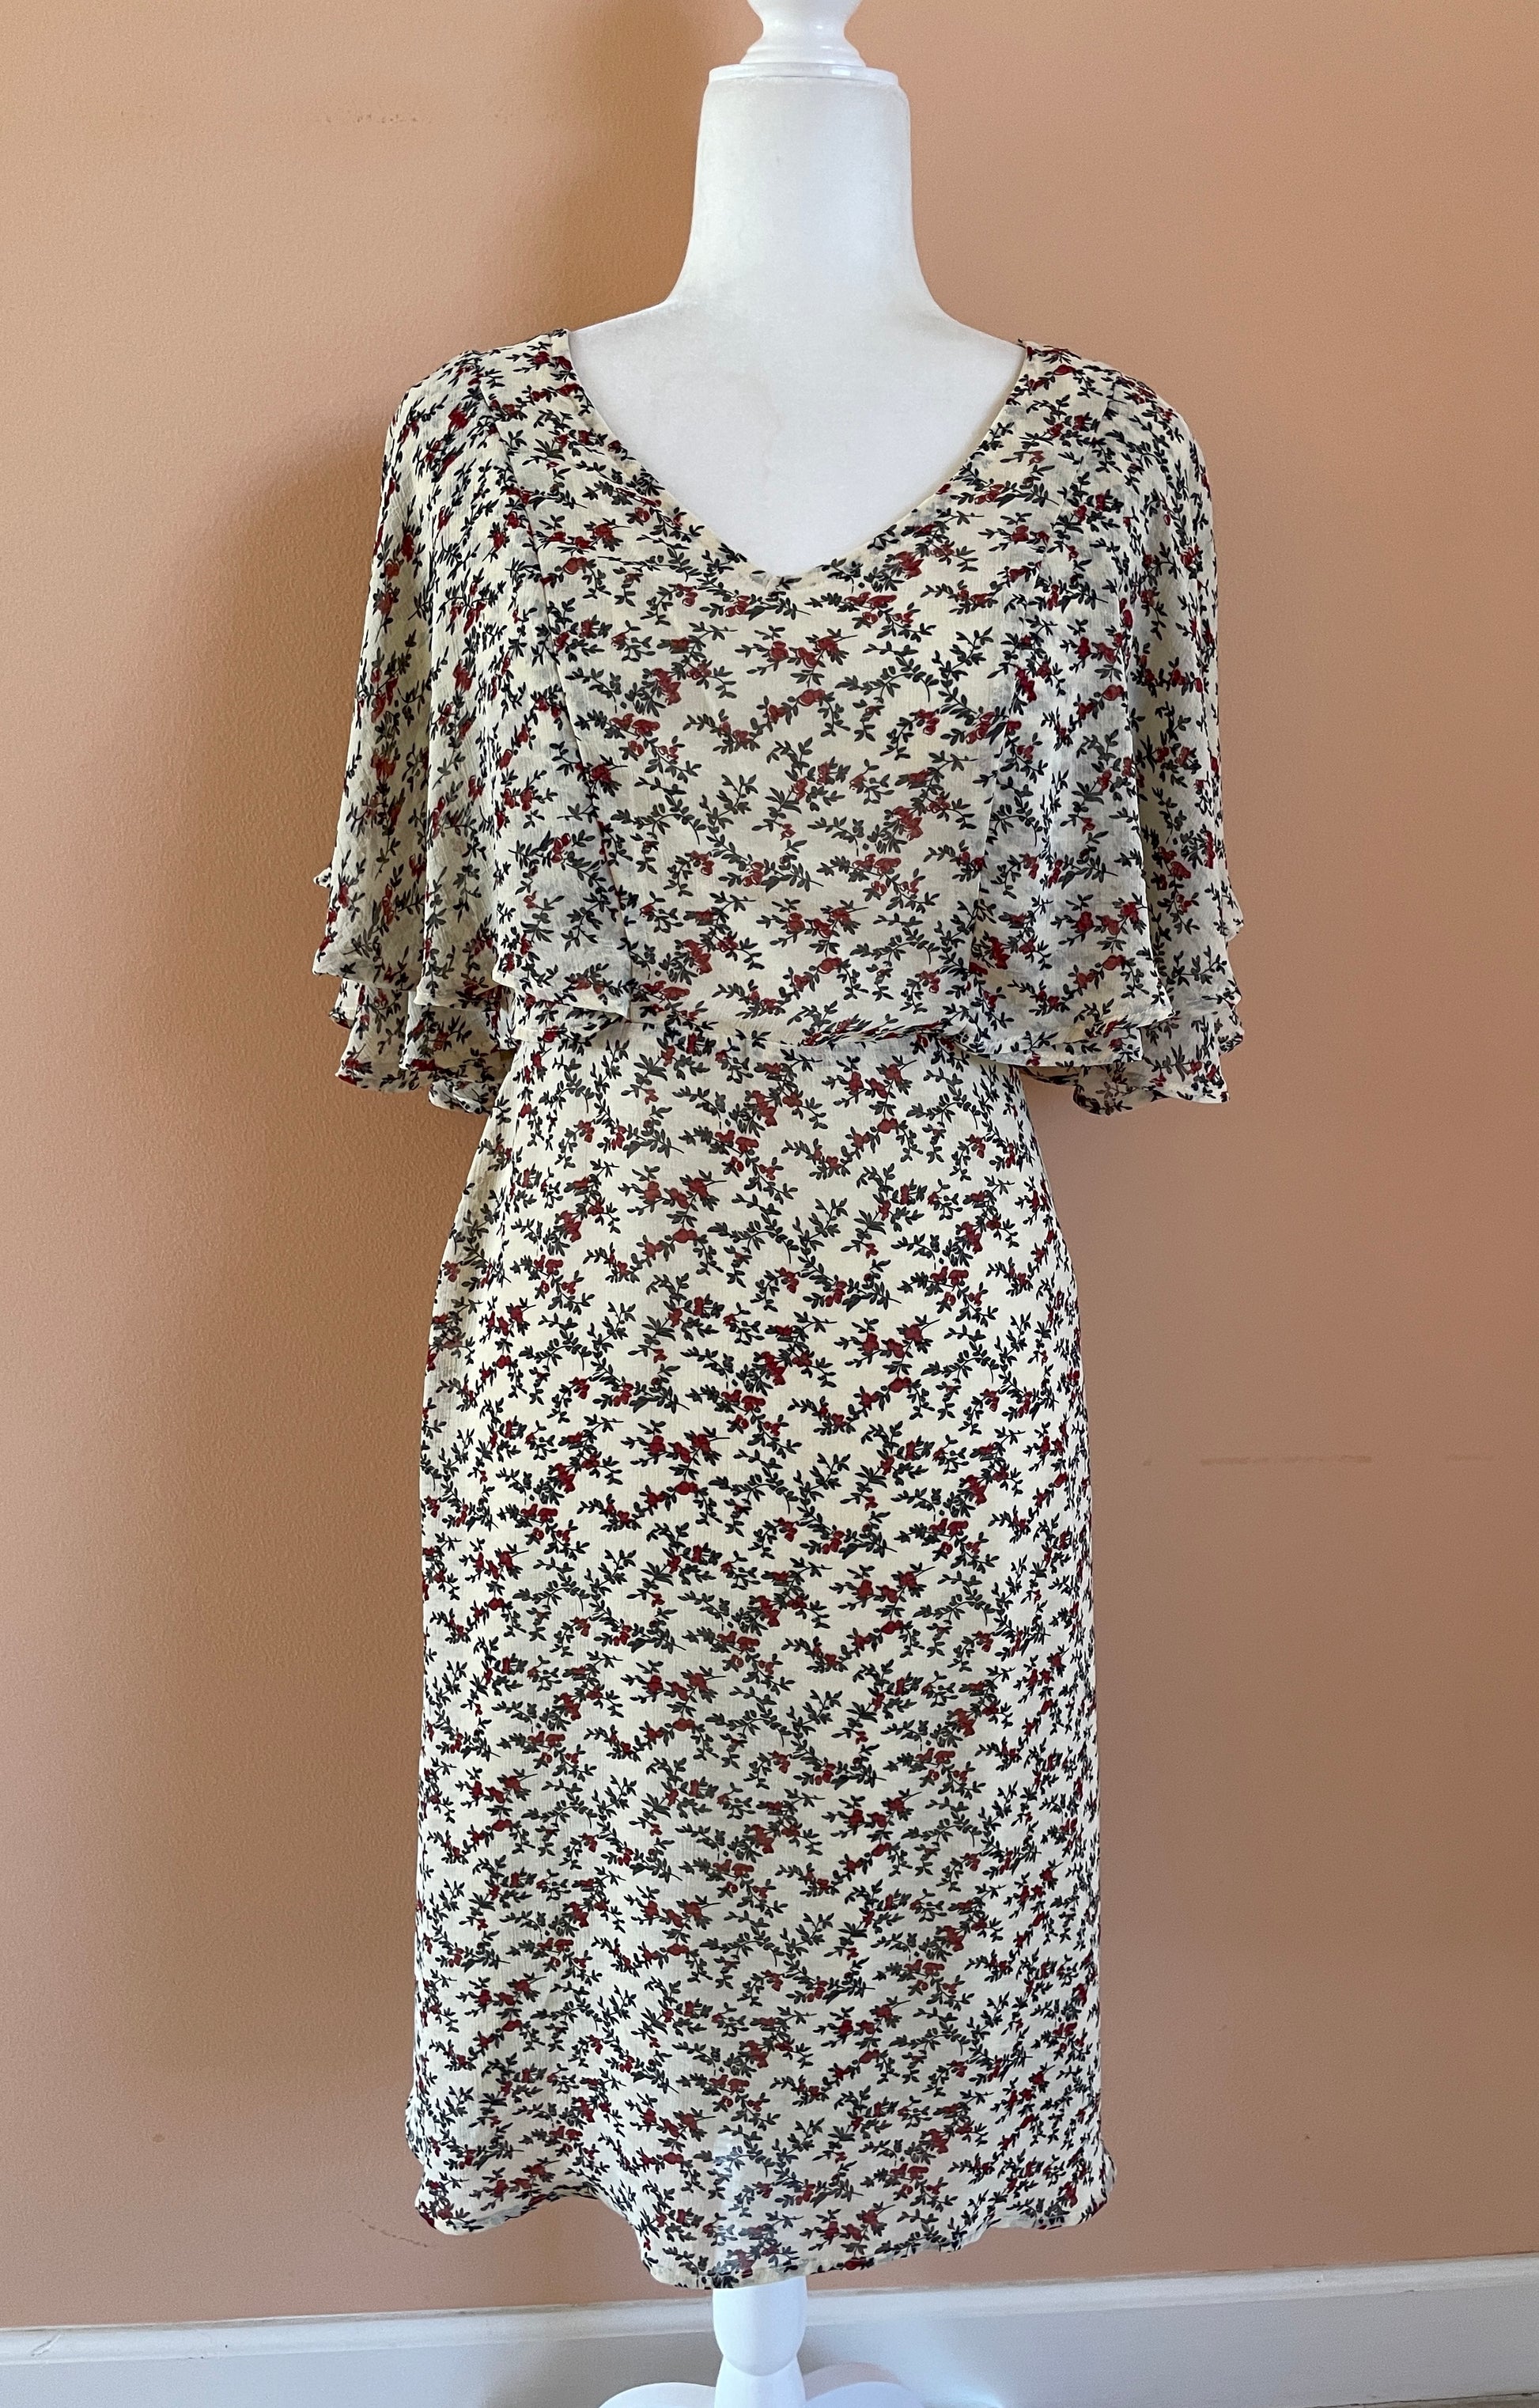 2000s Floral Print Dress 2000s Tiny Floral Print Lovely Summer Dress S